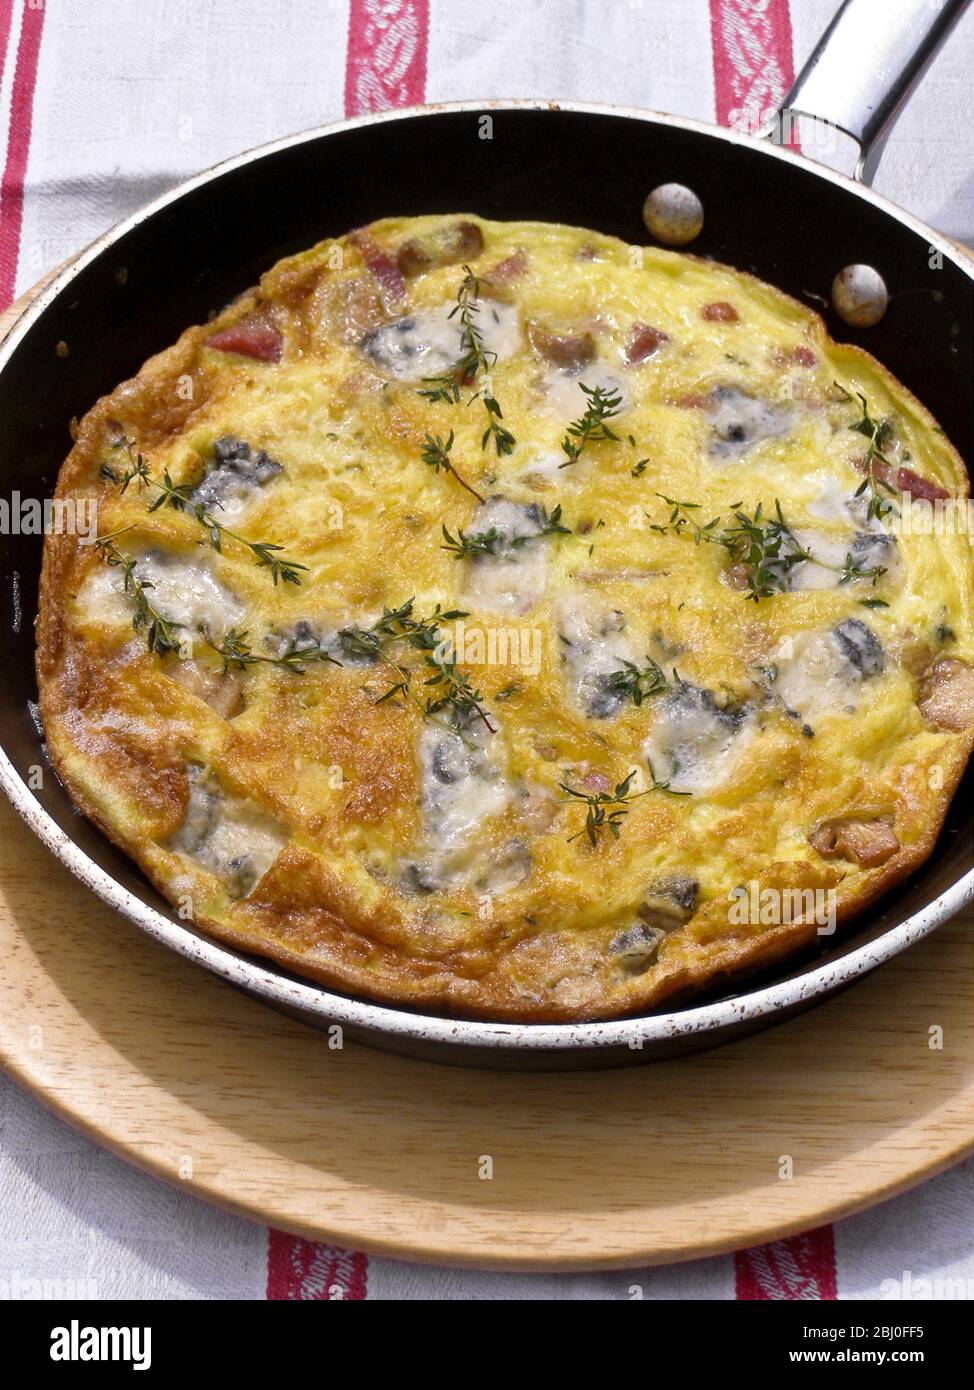 Frittata with goat's cheese, mushrooms and thyme, served in frying pan on wooden plate. - Stock Photo